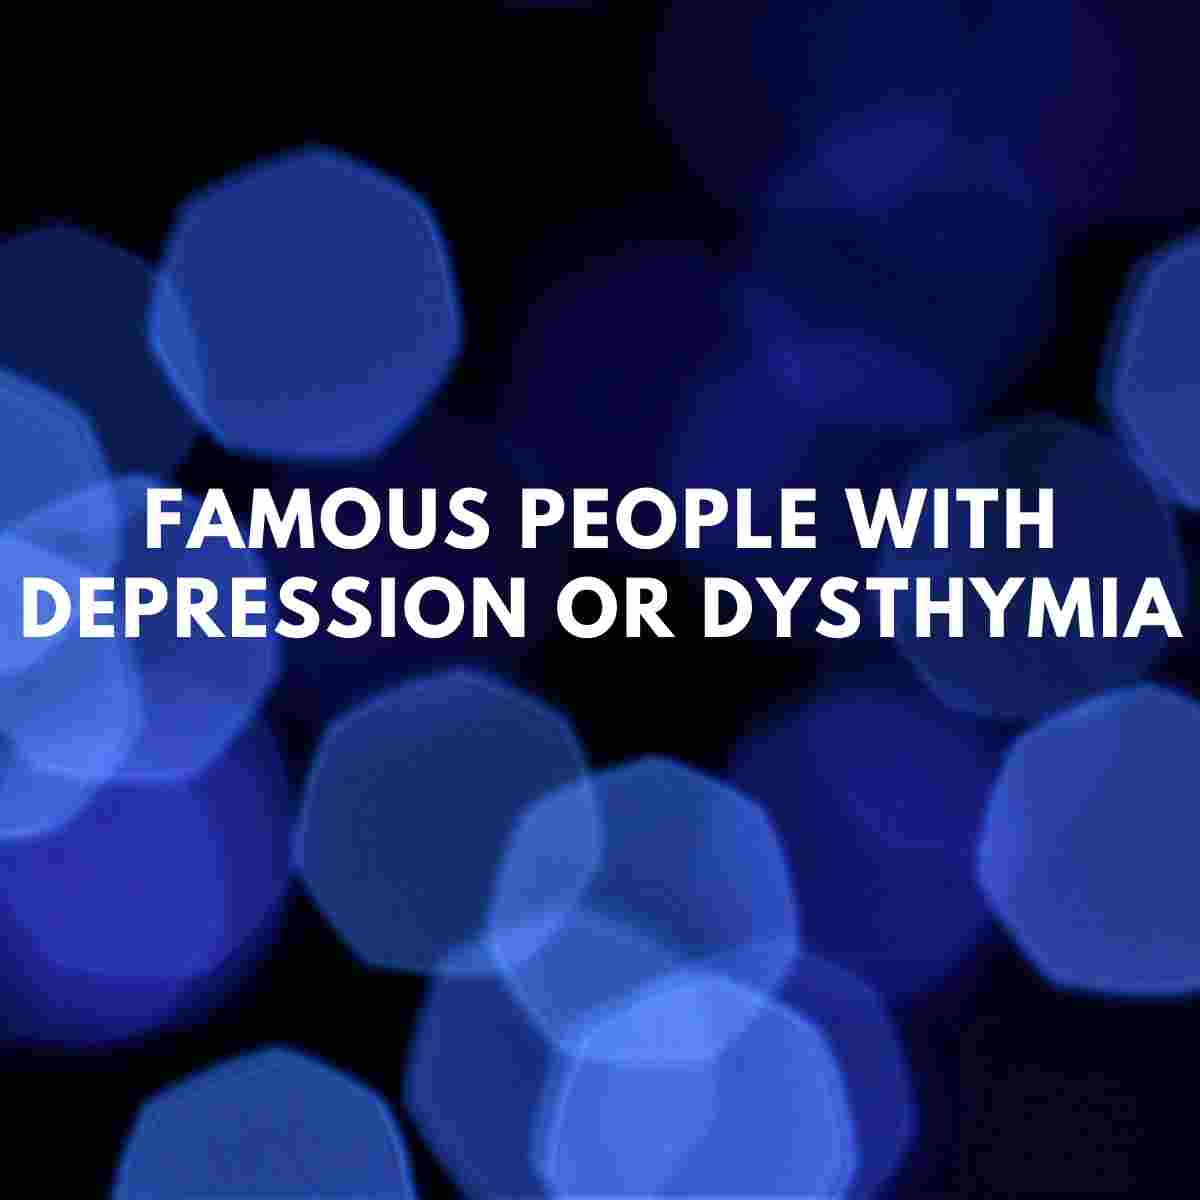 Famous People With Depression or Dysthymia